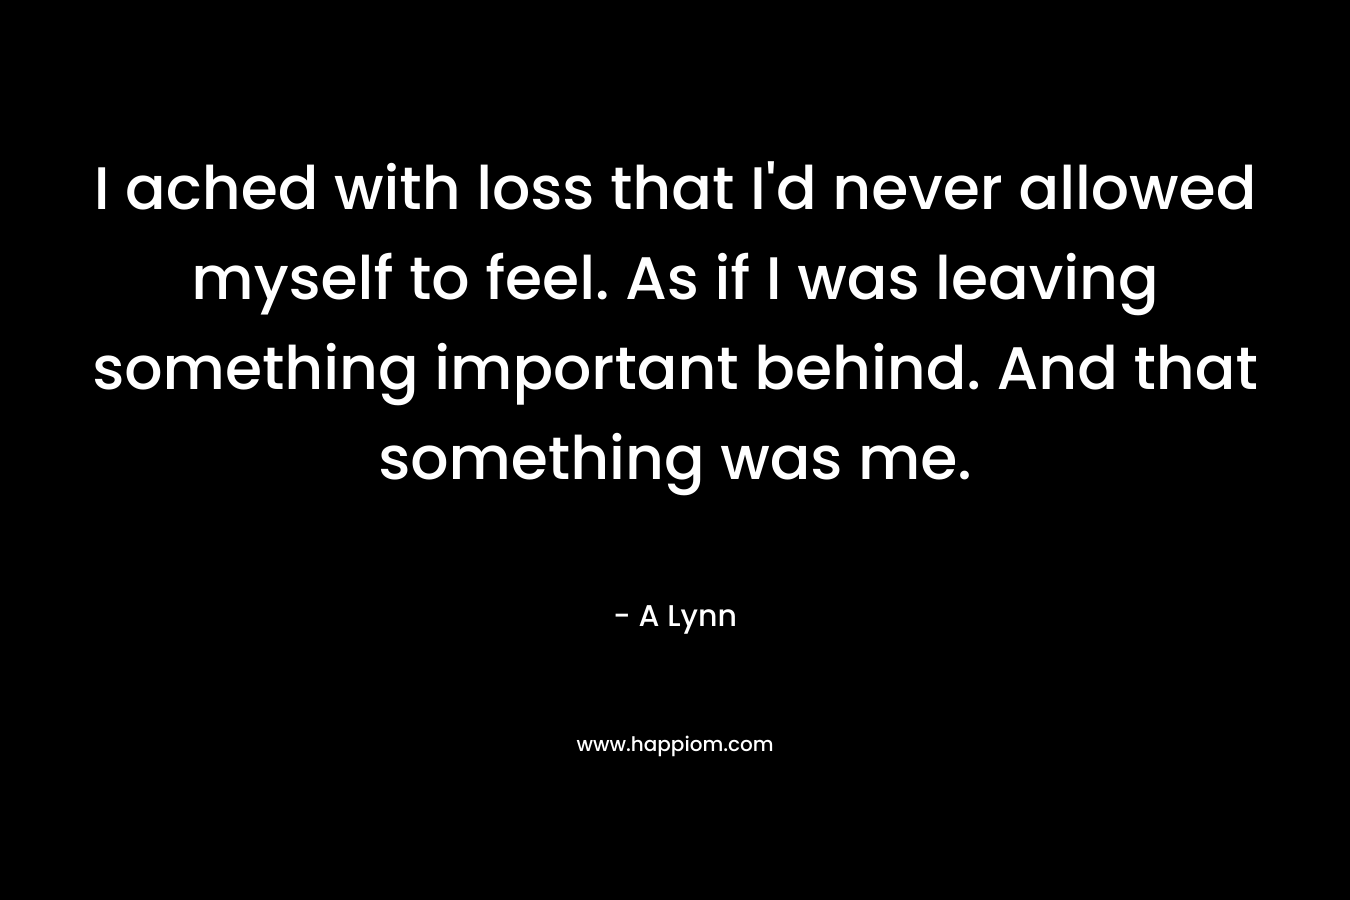 I ached with loss that I’d never allowed myself to feel. As if I was leaving something important behind. And that something was me. – A Lynn